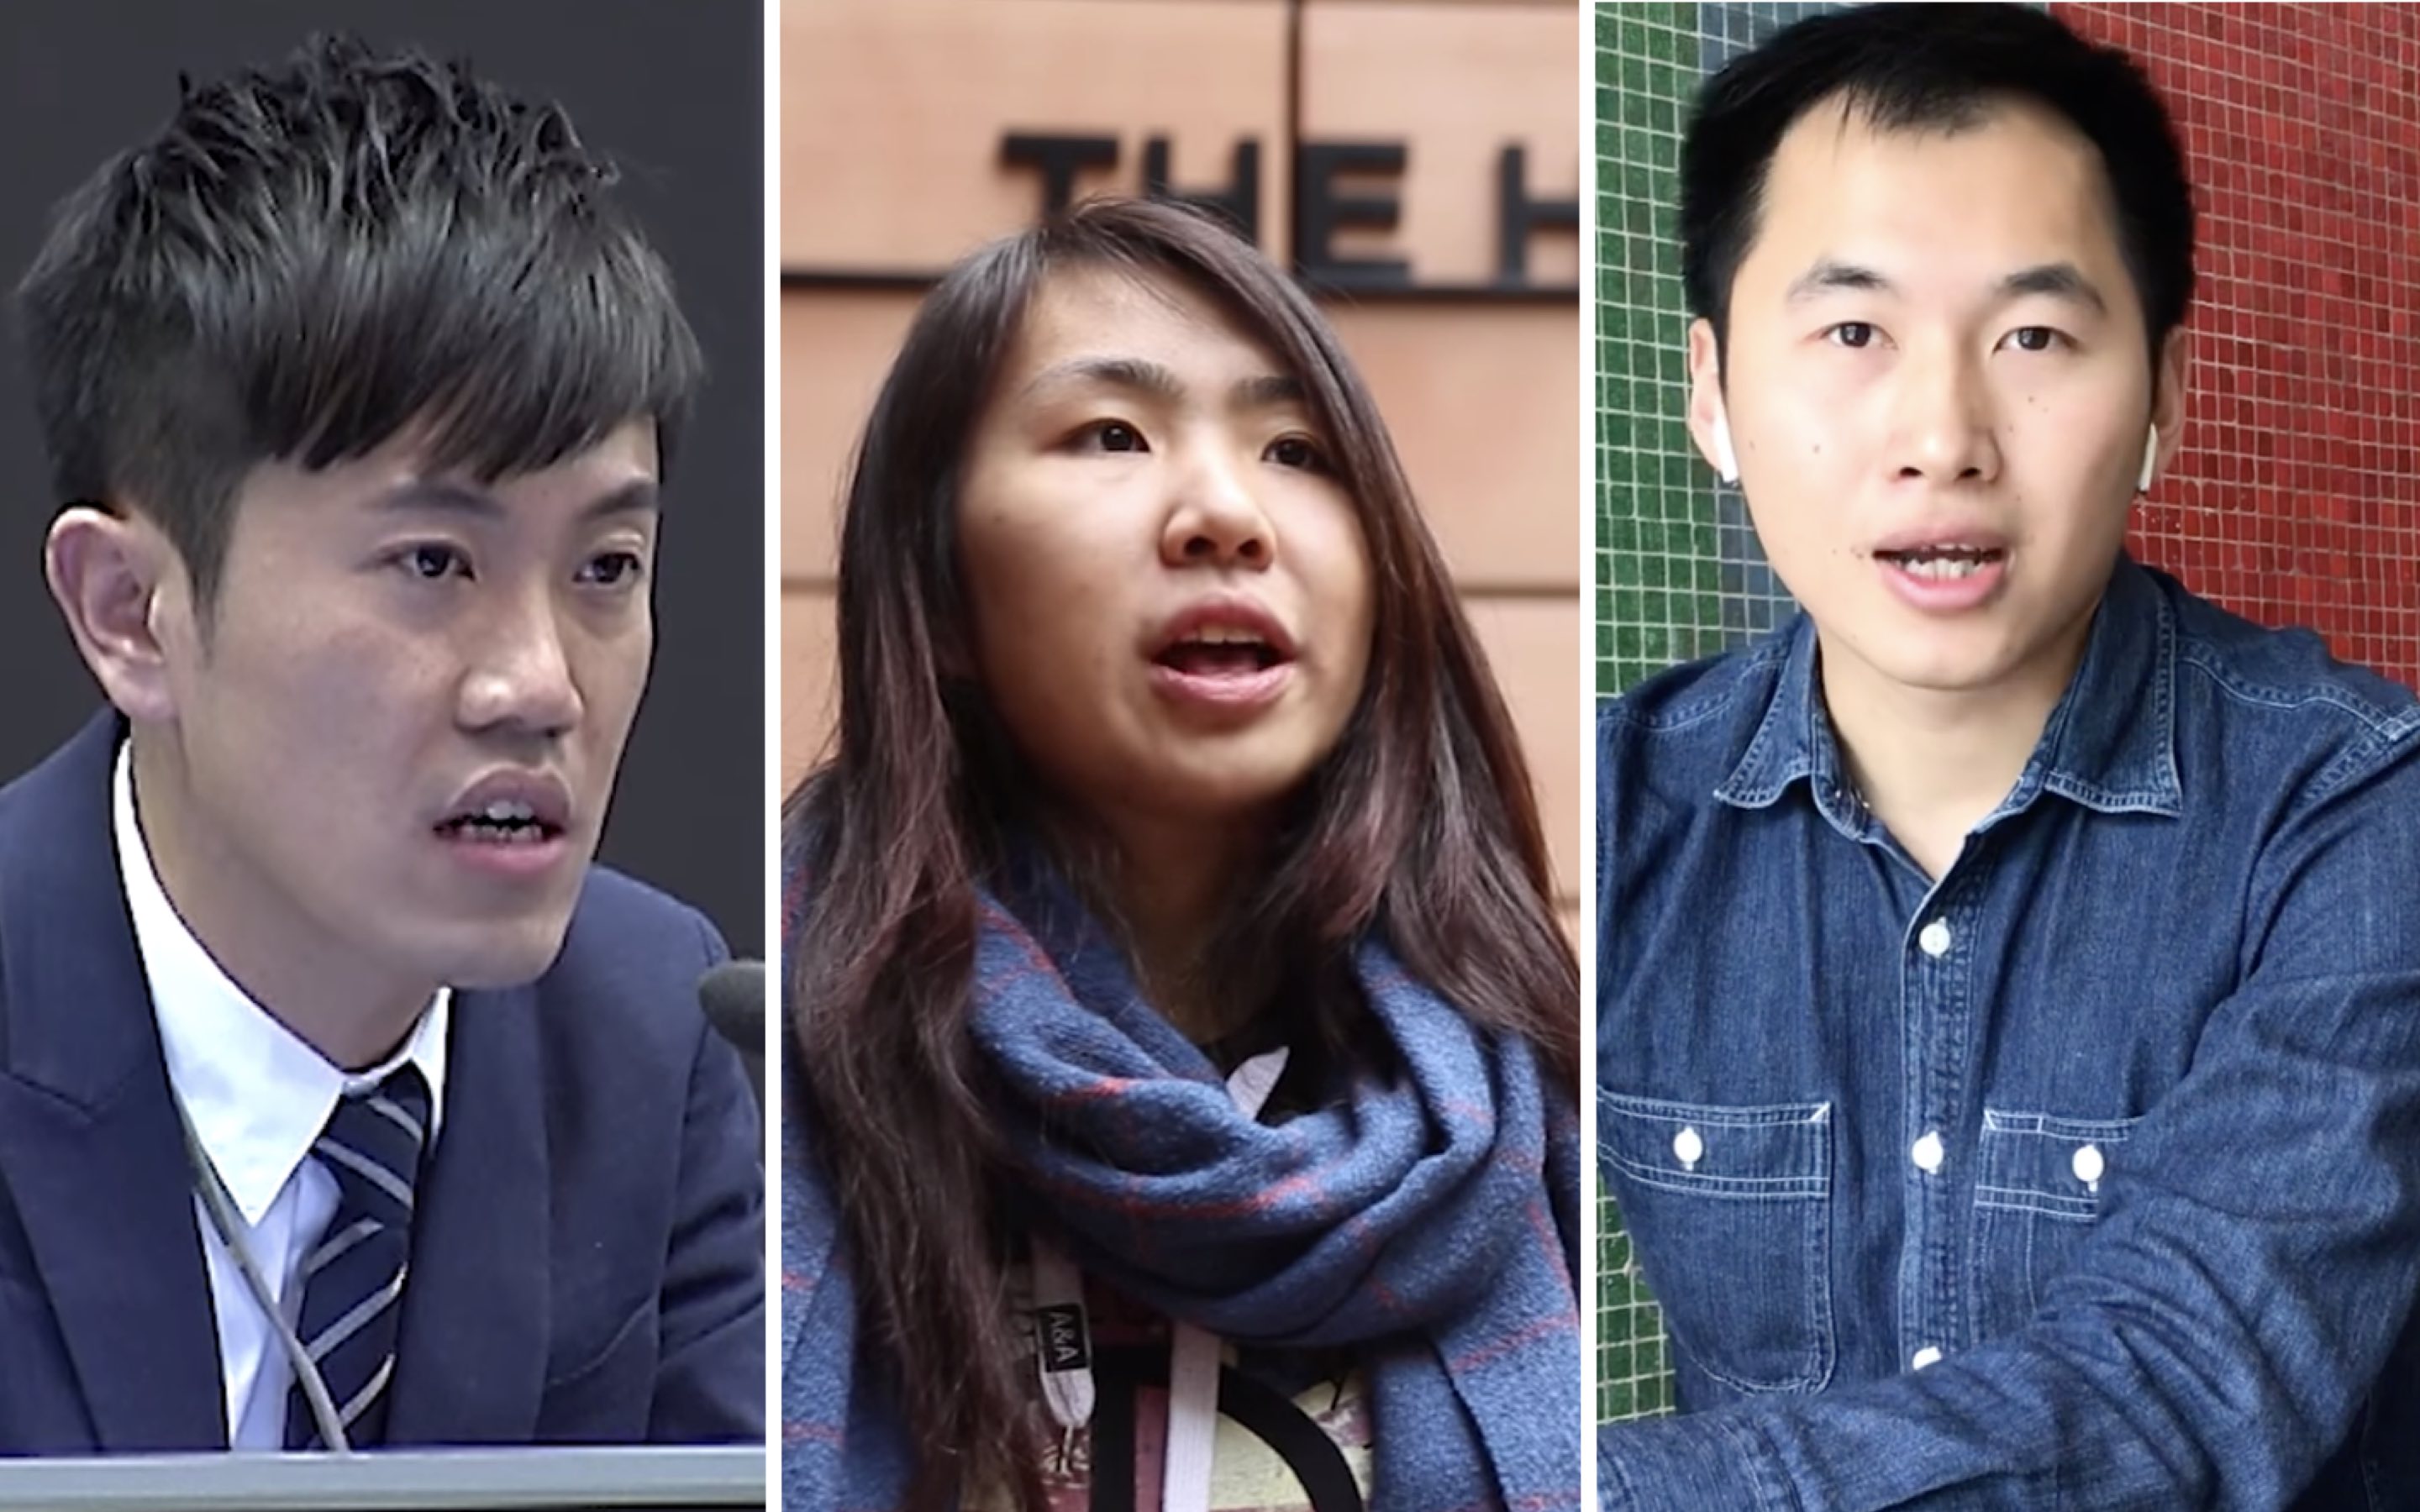 From left to right, Cheng Chung-tai, Althea Suen, and Rick Hui, who were all arrested today over accusations relating to their participation in Hong Kong’s protest movement. Screengrabs via YouTube.